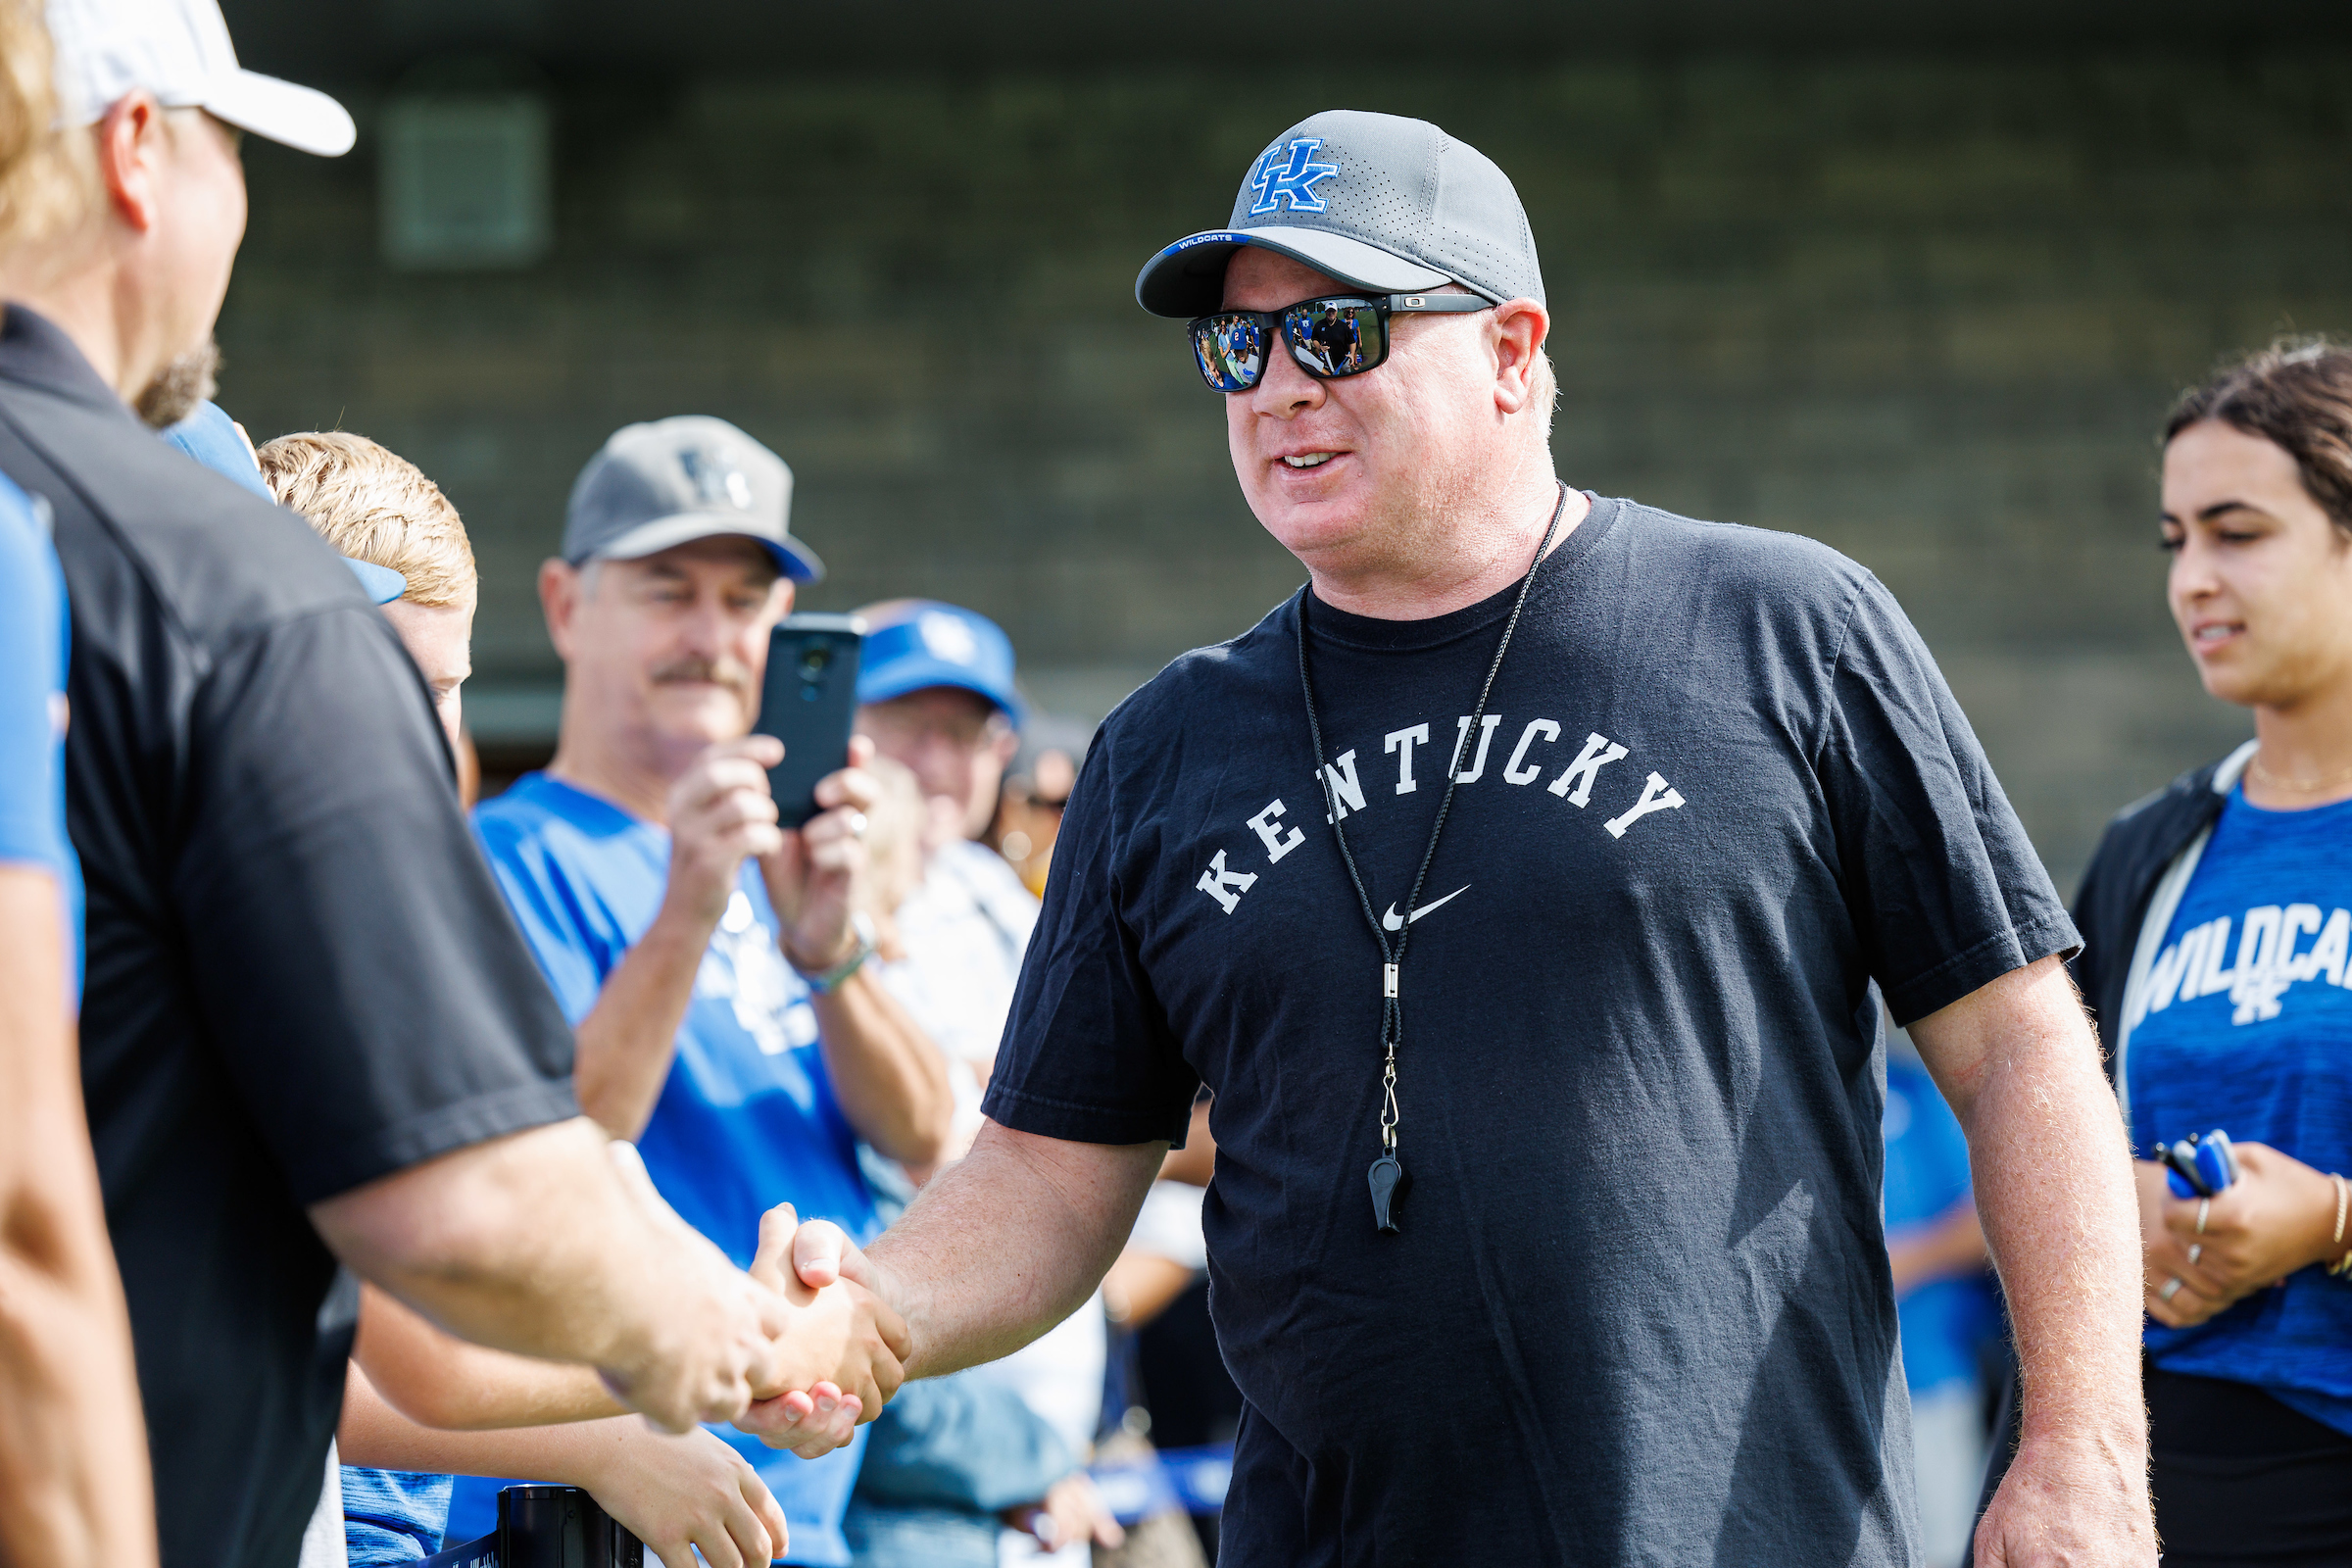 The UK HealthCare Mark Stoops Call-In Show Returns for 2022